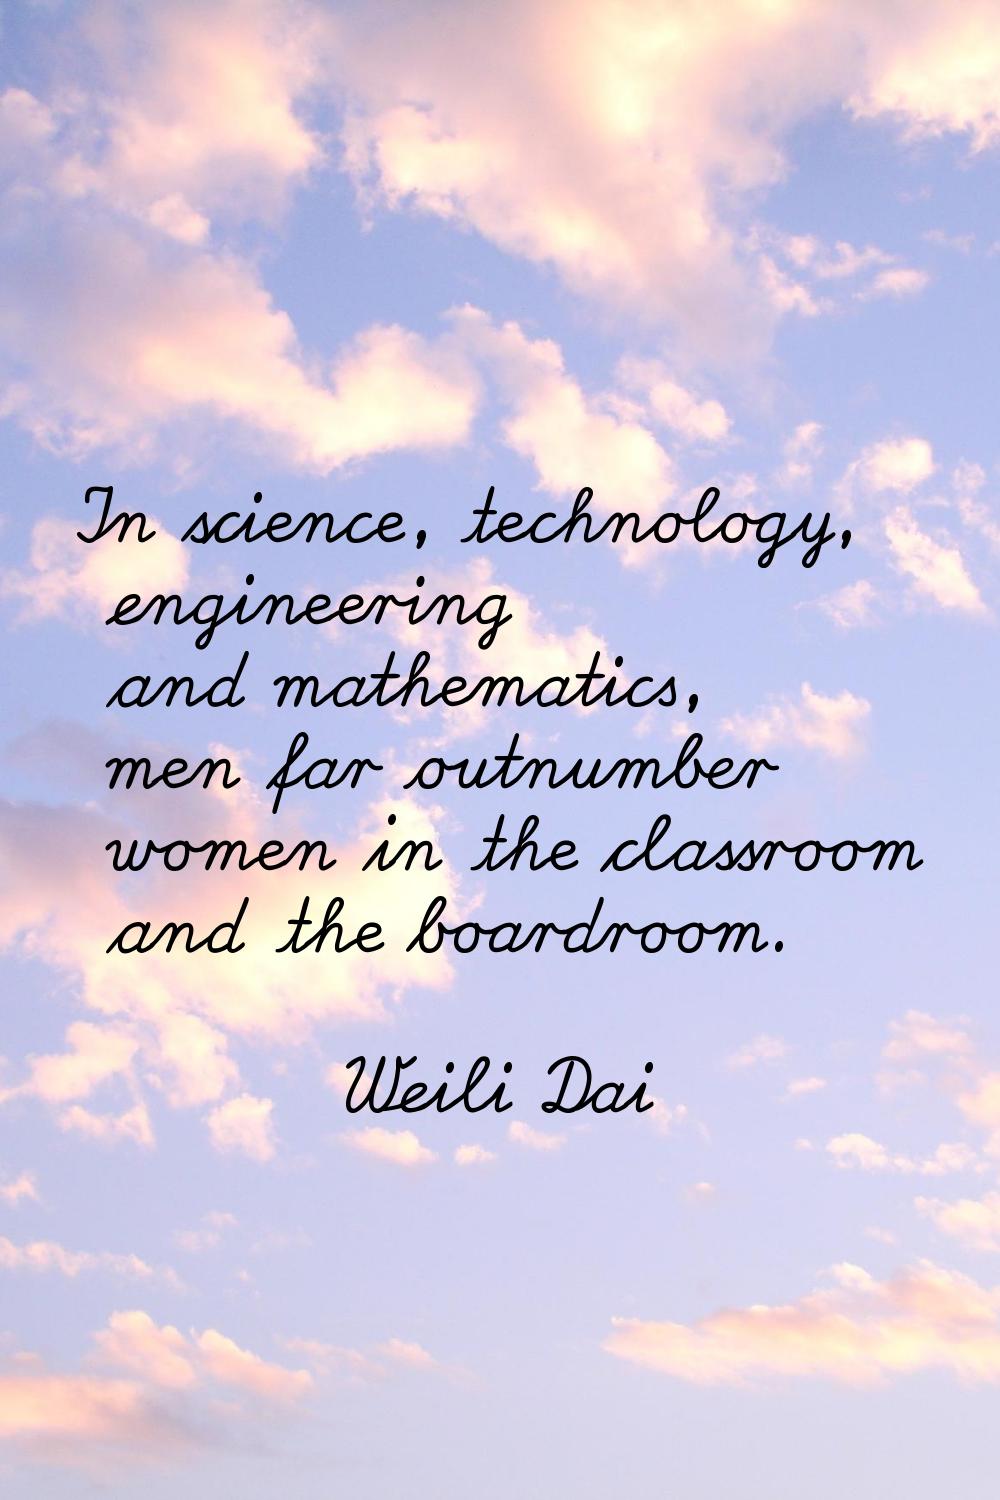 In science, technology, engineering and mathematics, men far outnumber women in the classroom and t